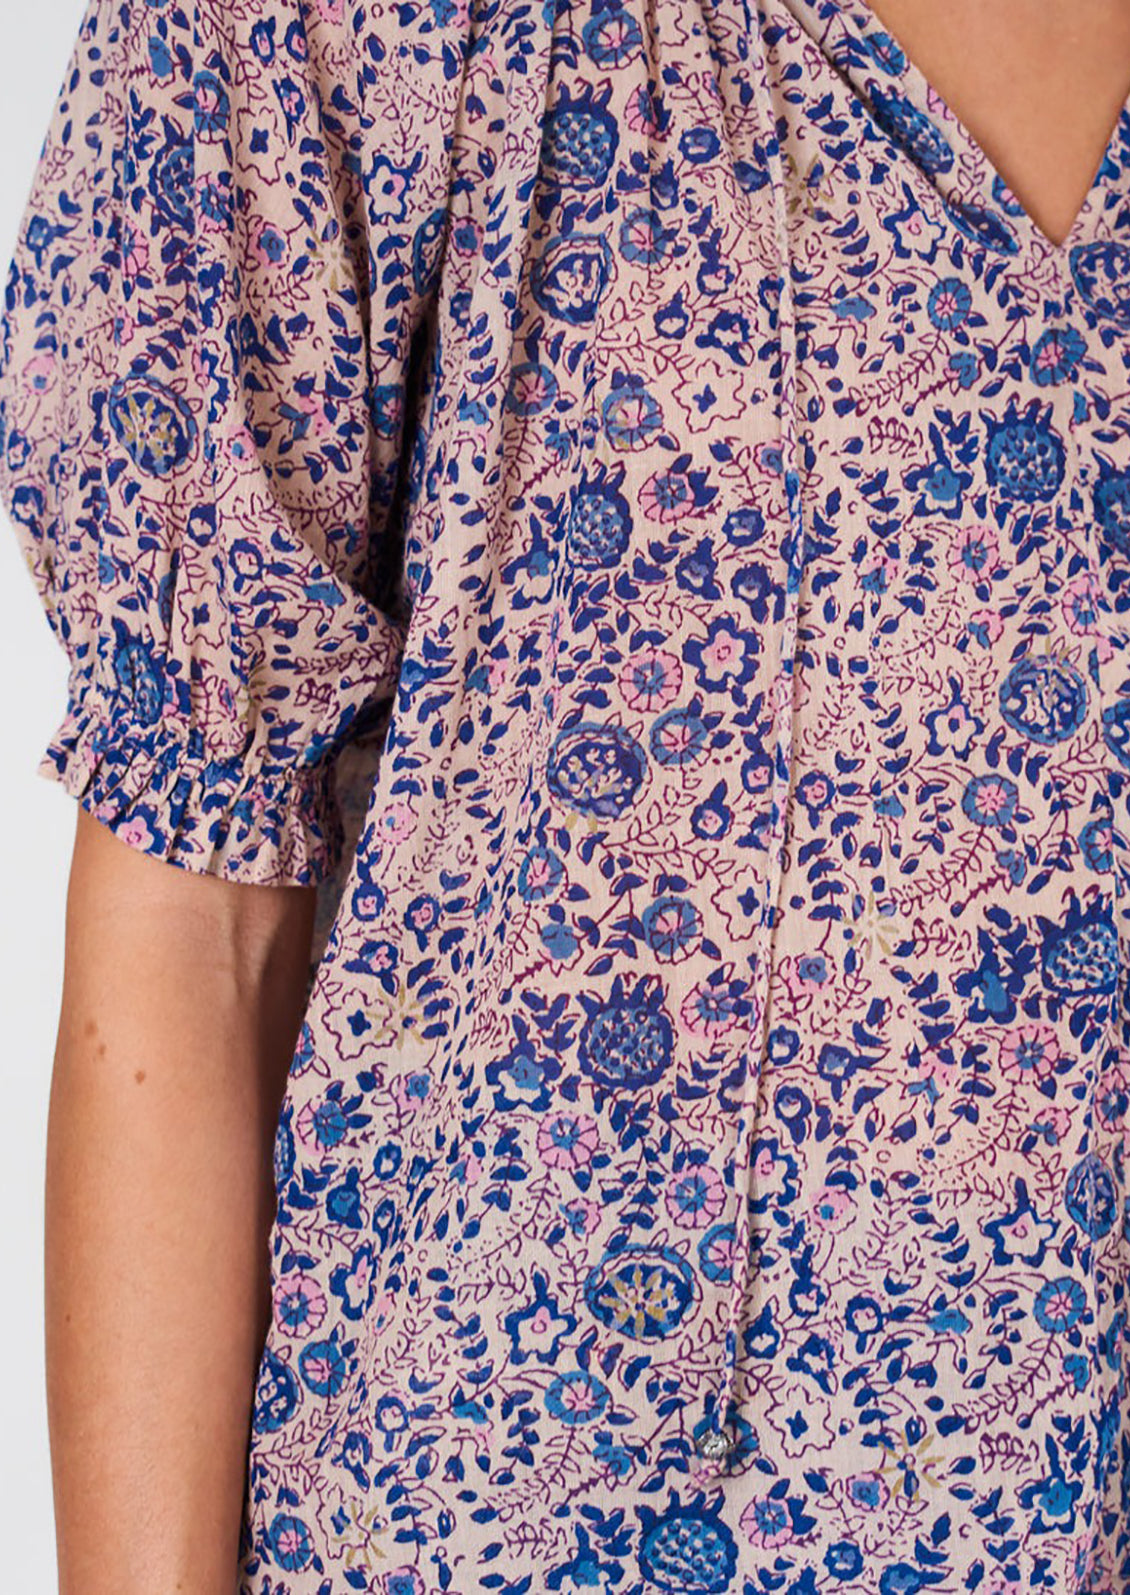 A woman wearing a floral block printed shirt with short sleeves.